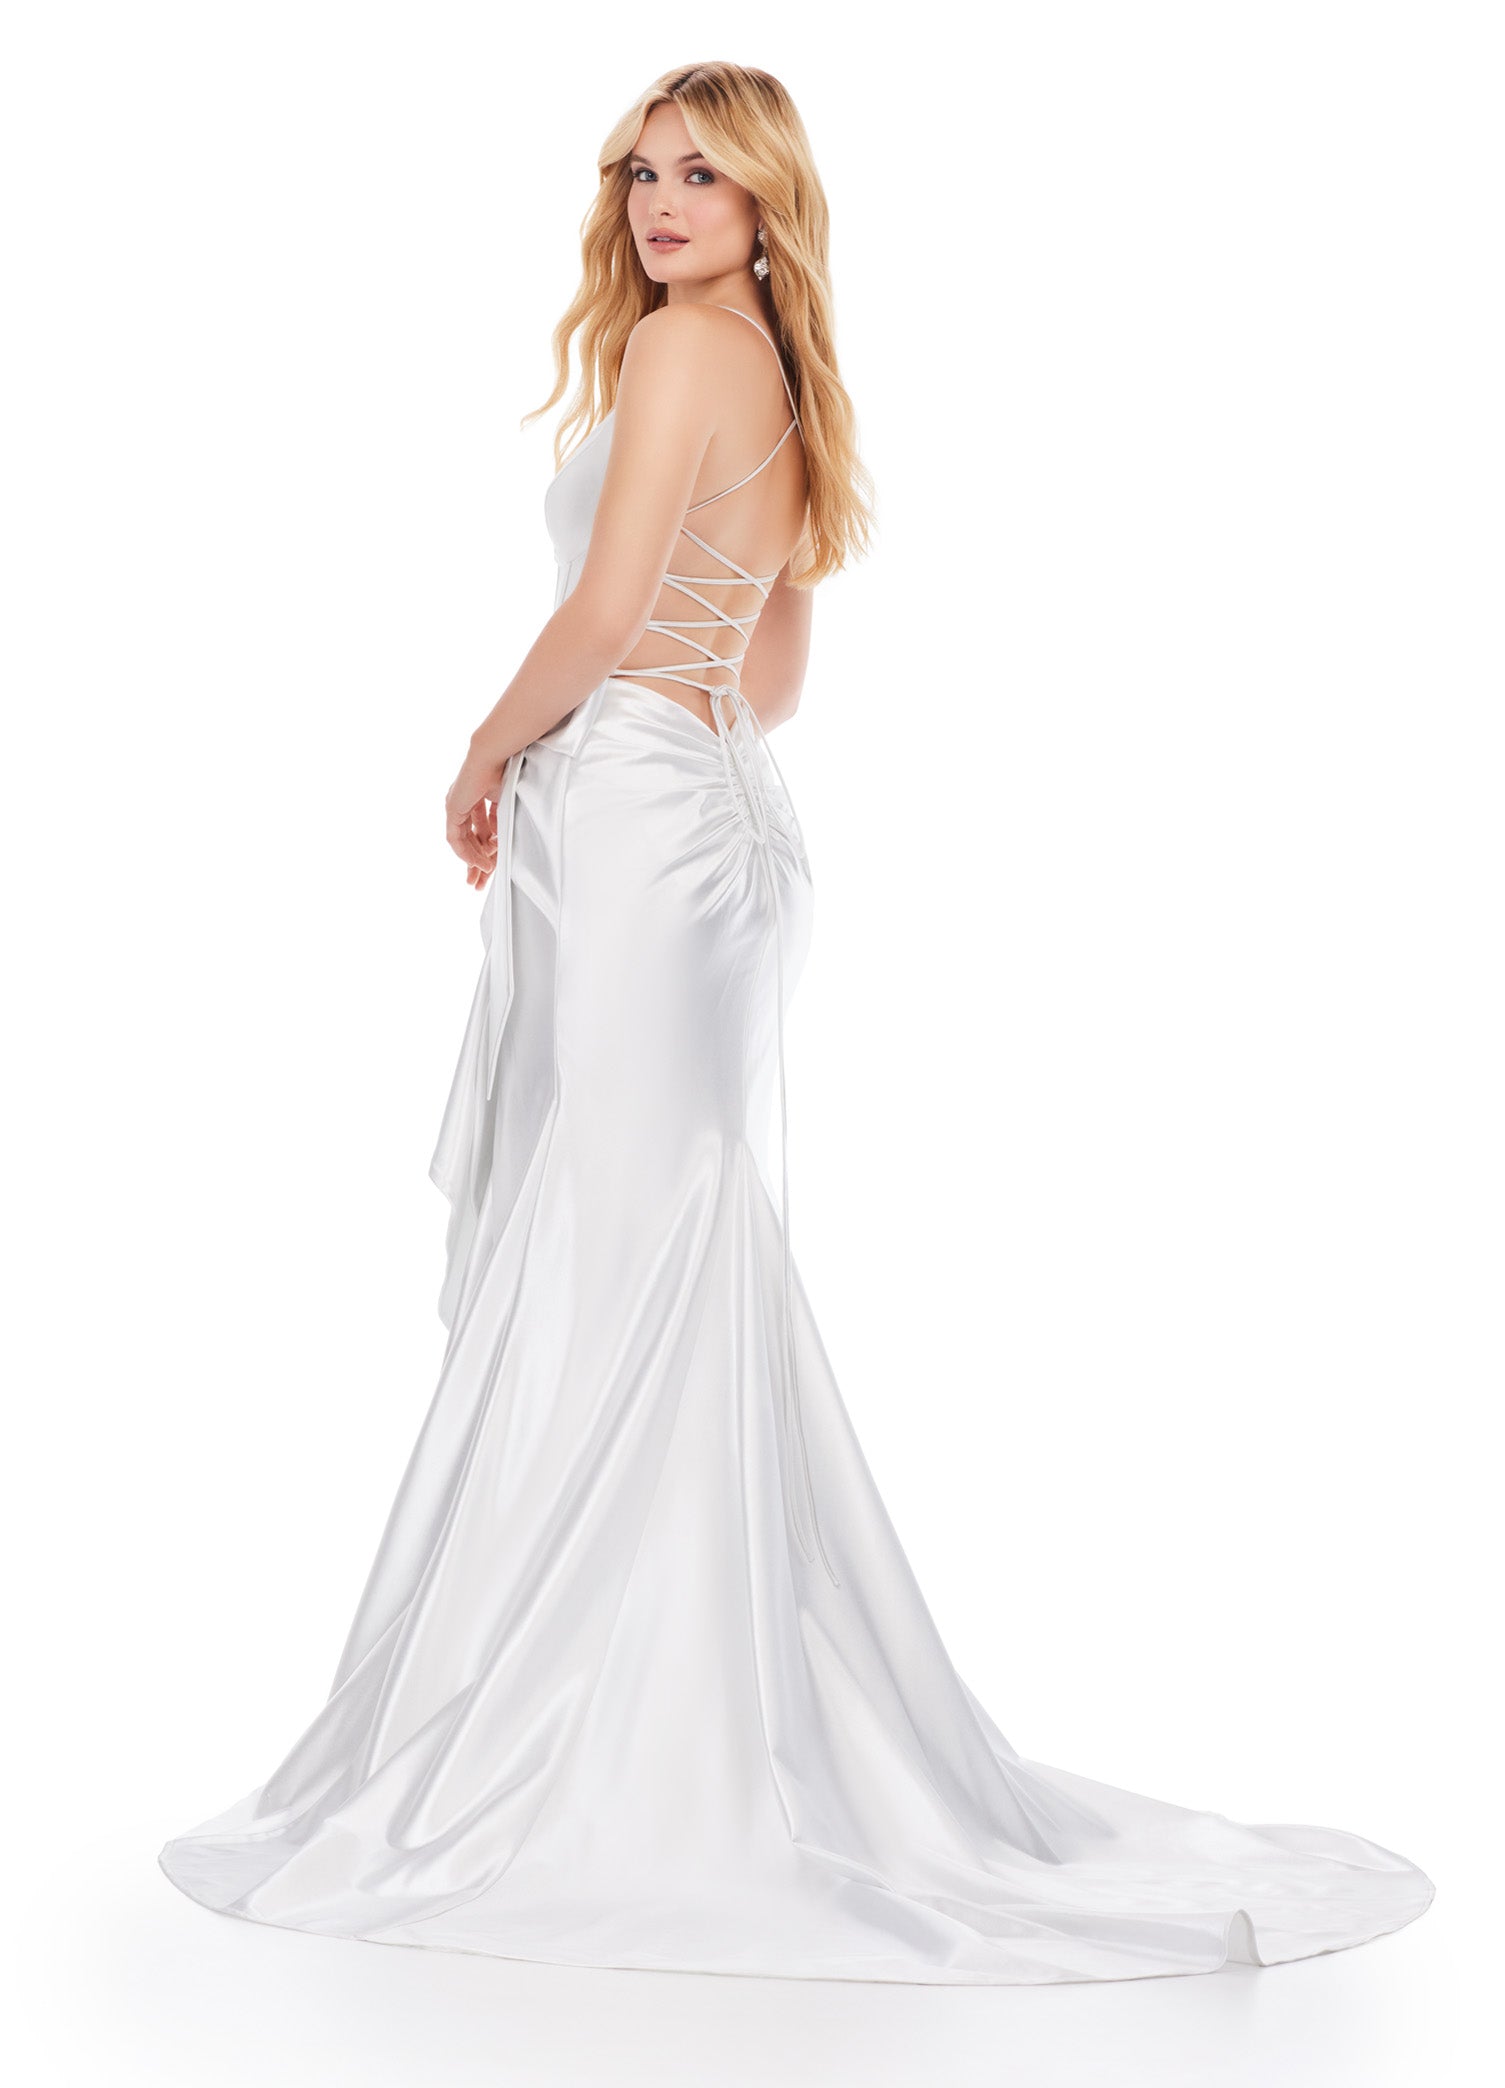 Be the belle of the ball in the Ashley Lauren 11638 Long Prom Dress. Featuring a corset top and spaghetti straps, this stunning gown exudes elegance. The cascading bow and ruffle details add a touch of drama, making it the perfect choice for any formal event or pageant. Edgy and fabulous! This shimmer jersey gown features a corset bodice with a bow and cascading ruffle detail. The lace up back and spaghetti straps make this extra fab.